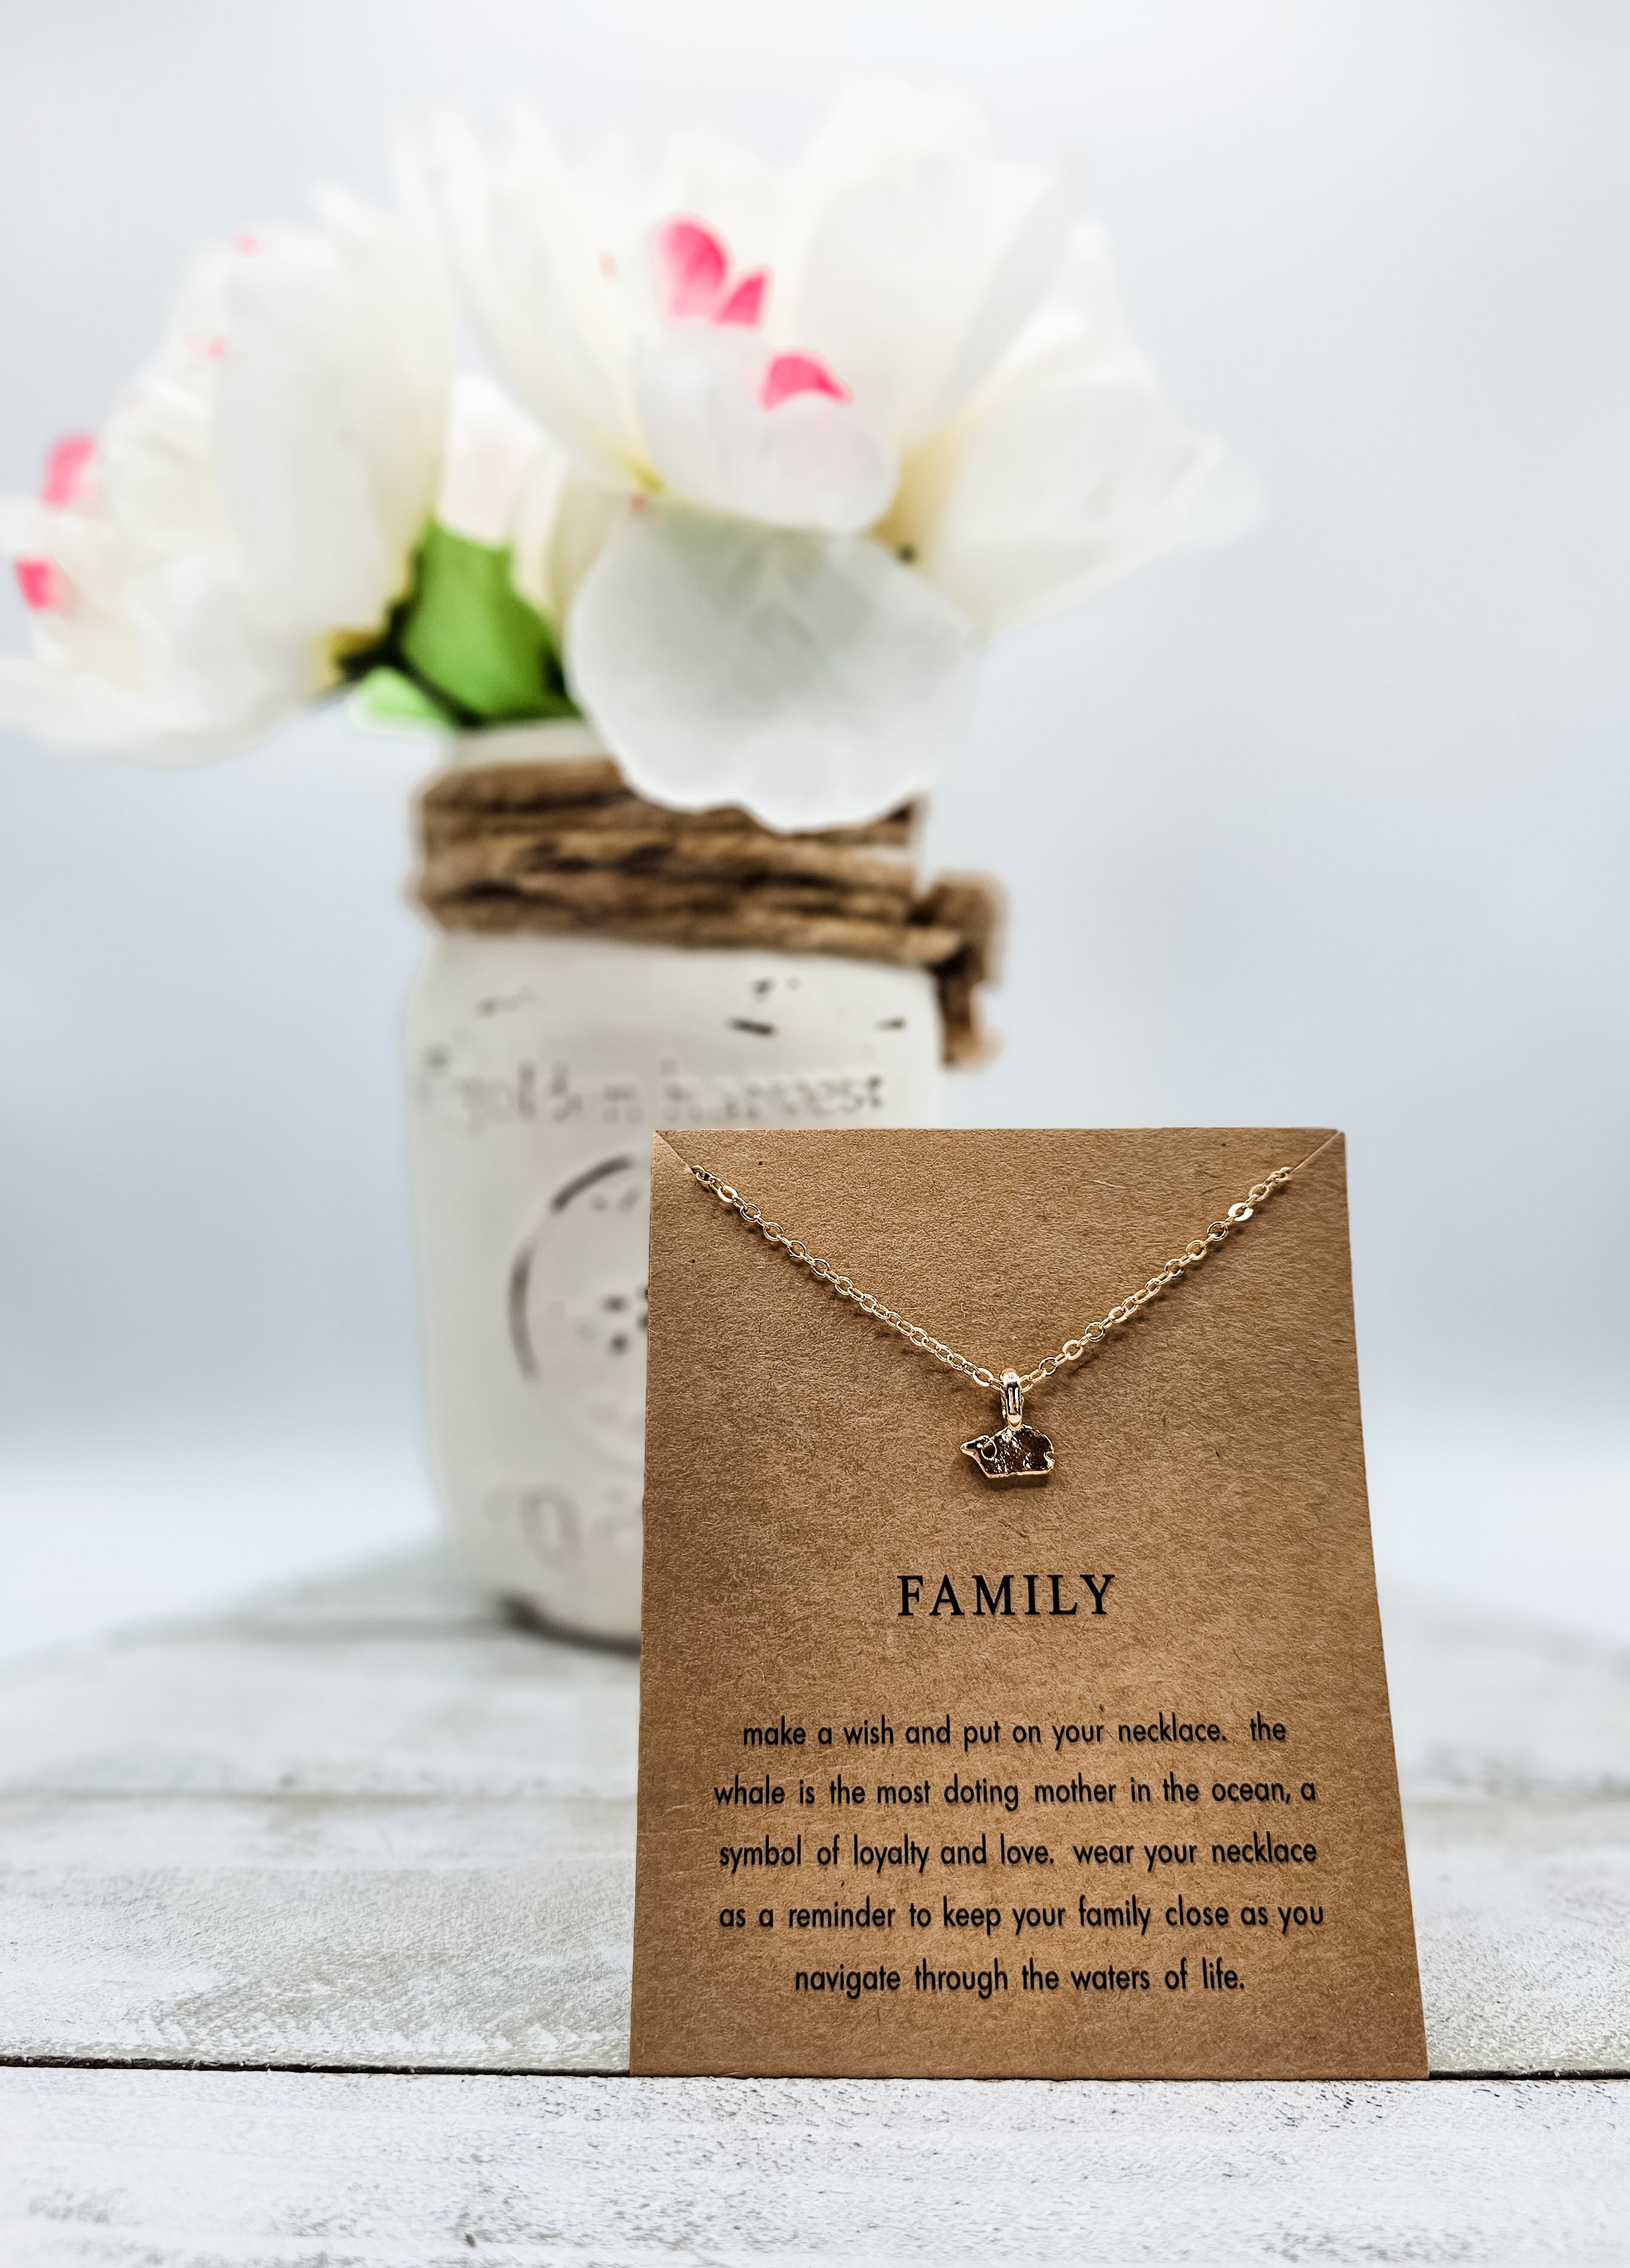 Family - Inspirational and Meaningful Pendant Necklace